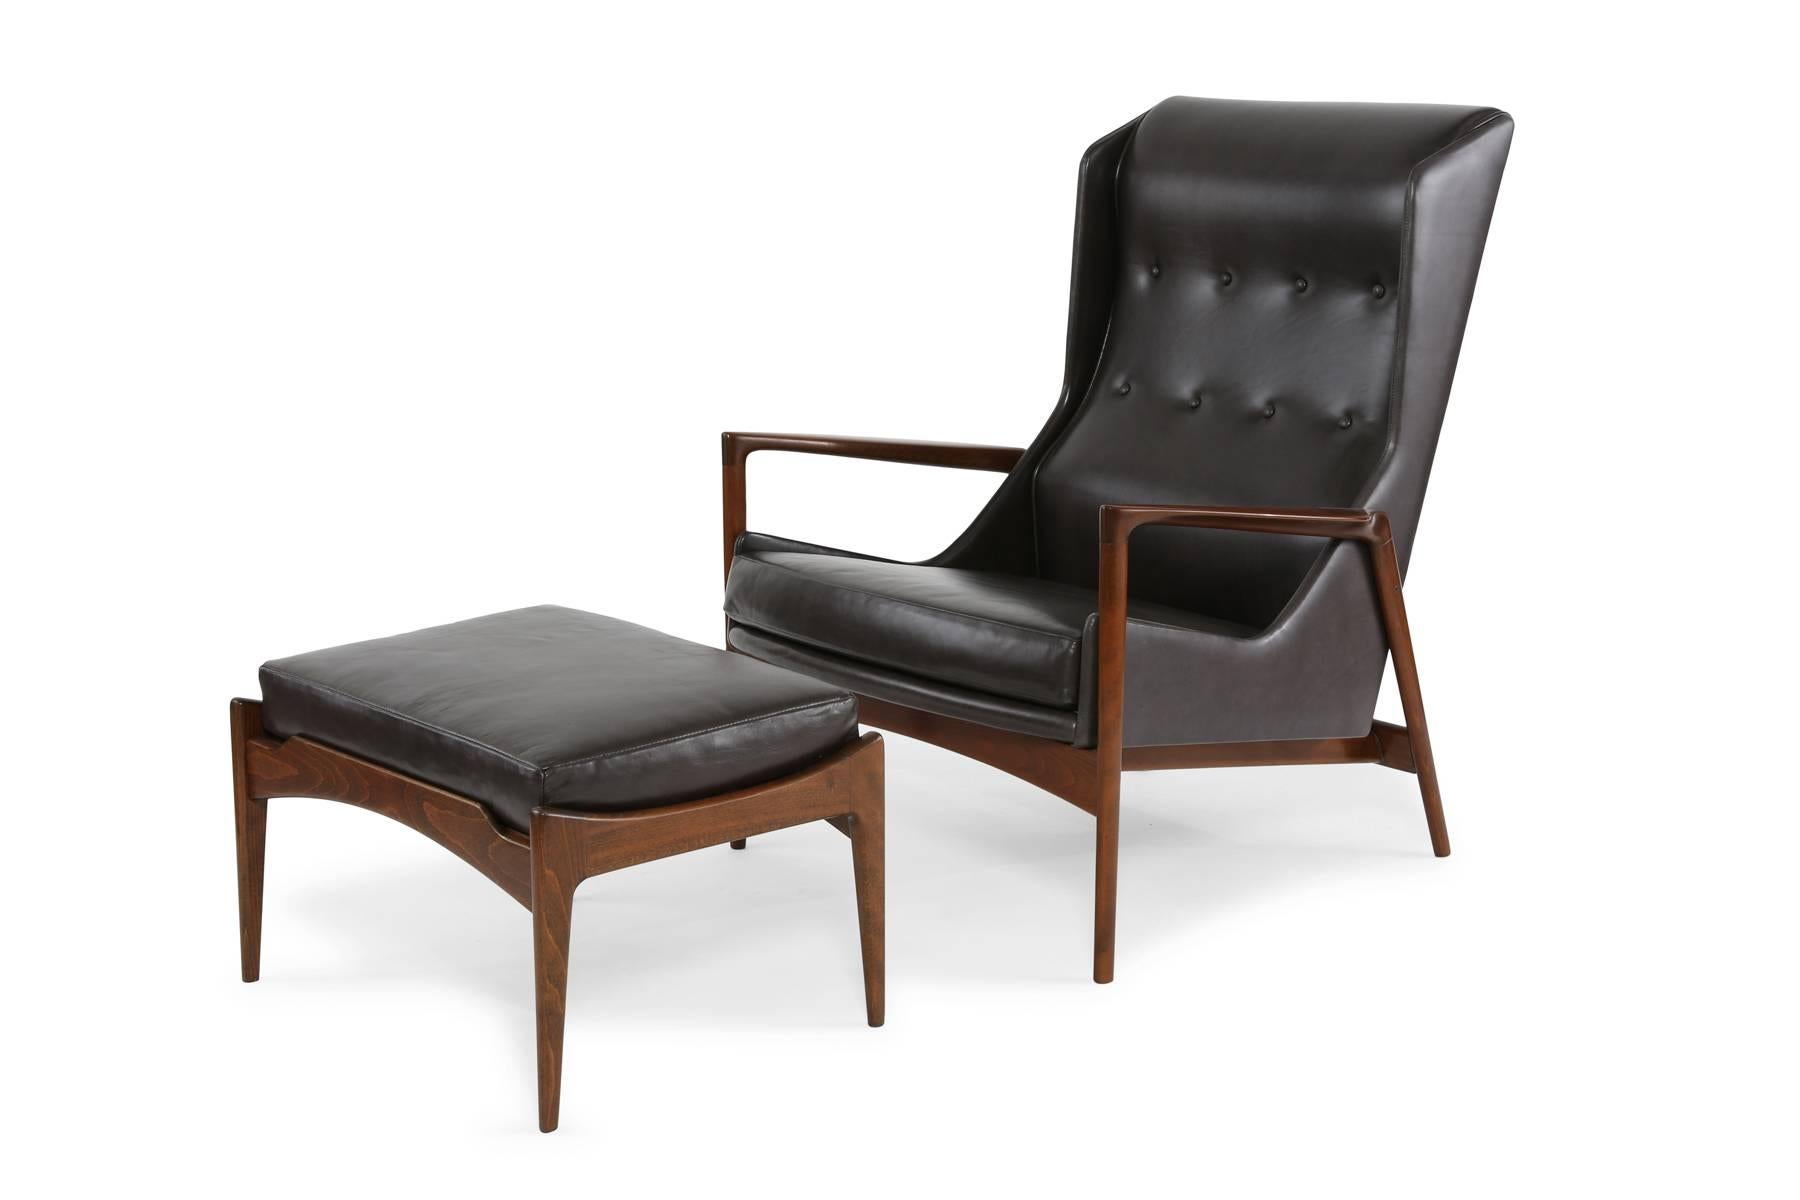 Seldom seen pair of lounge chairs and ottoman by Ib Kofod Larsen. These stunning examples have sculpted newly finished solid teak frames and have been masterfully upholstered in a perfectly patinated charcoal leather. Price listed is for the pair of